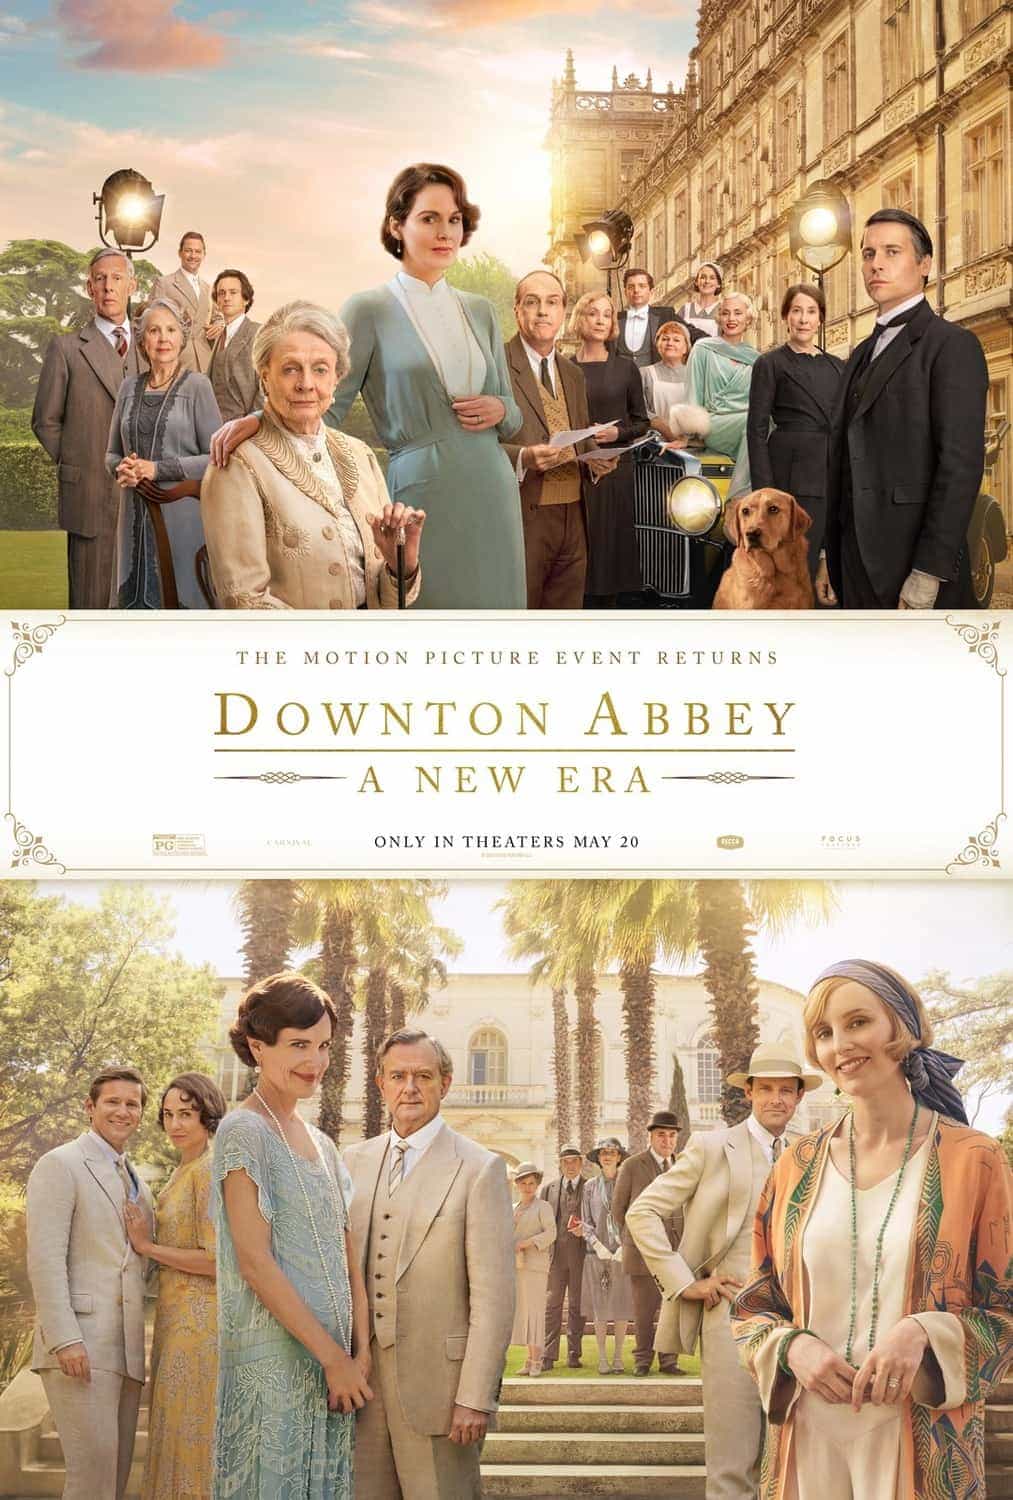 UK Box Office Weekend Report 29th April - 1st May 2022: Downton Abbey sequel makes its debut at the top of the UK box office with £3 Million